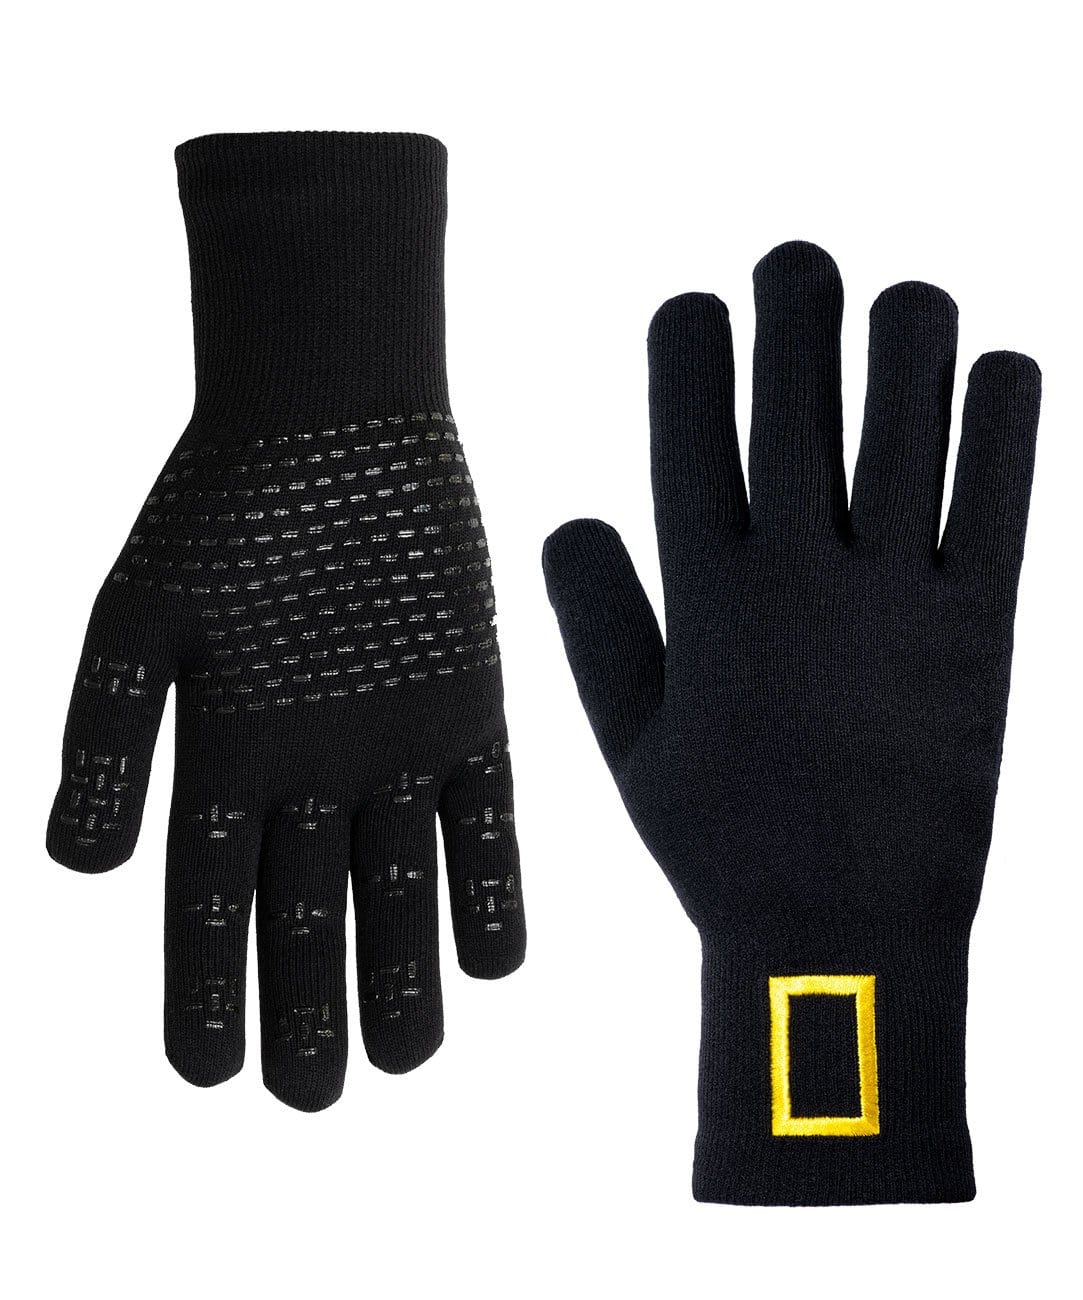 National Geographic Knit Waterproof Gloves Wool Blend